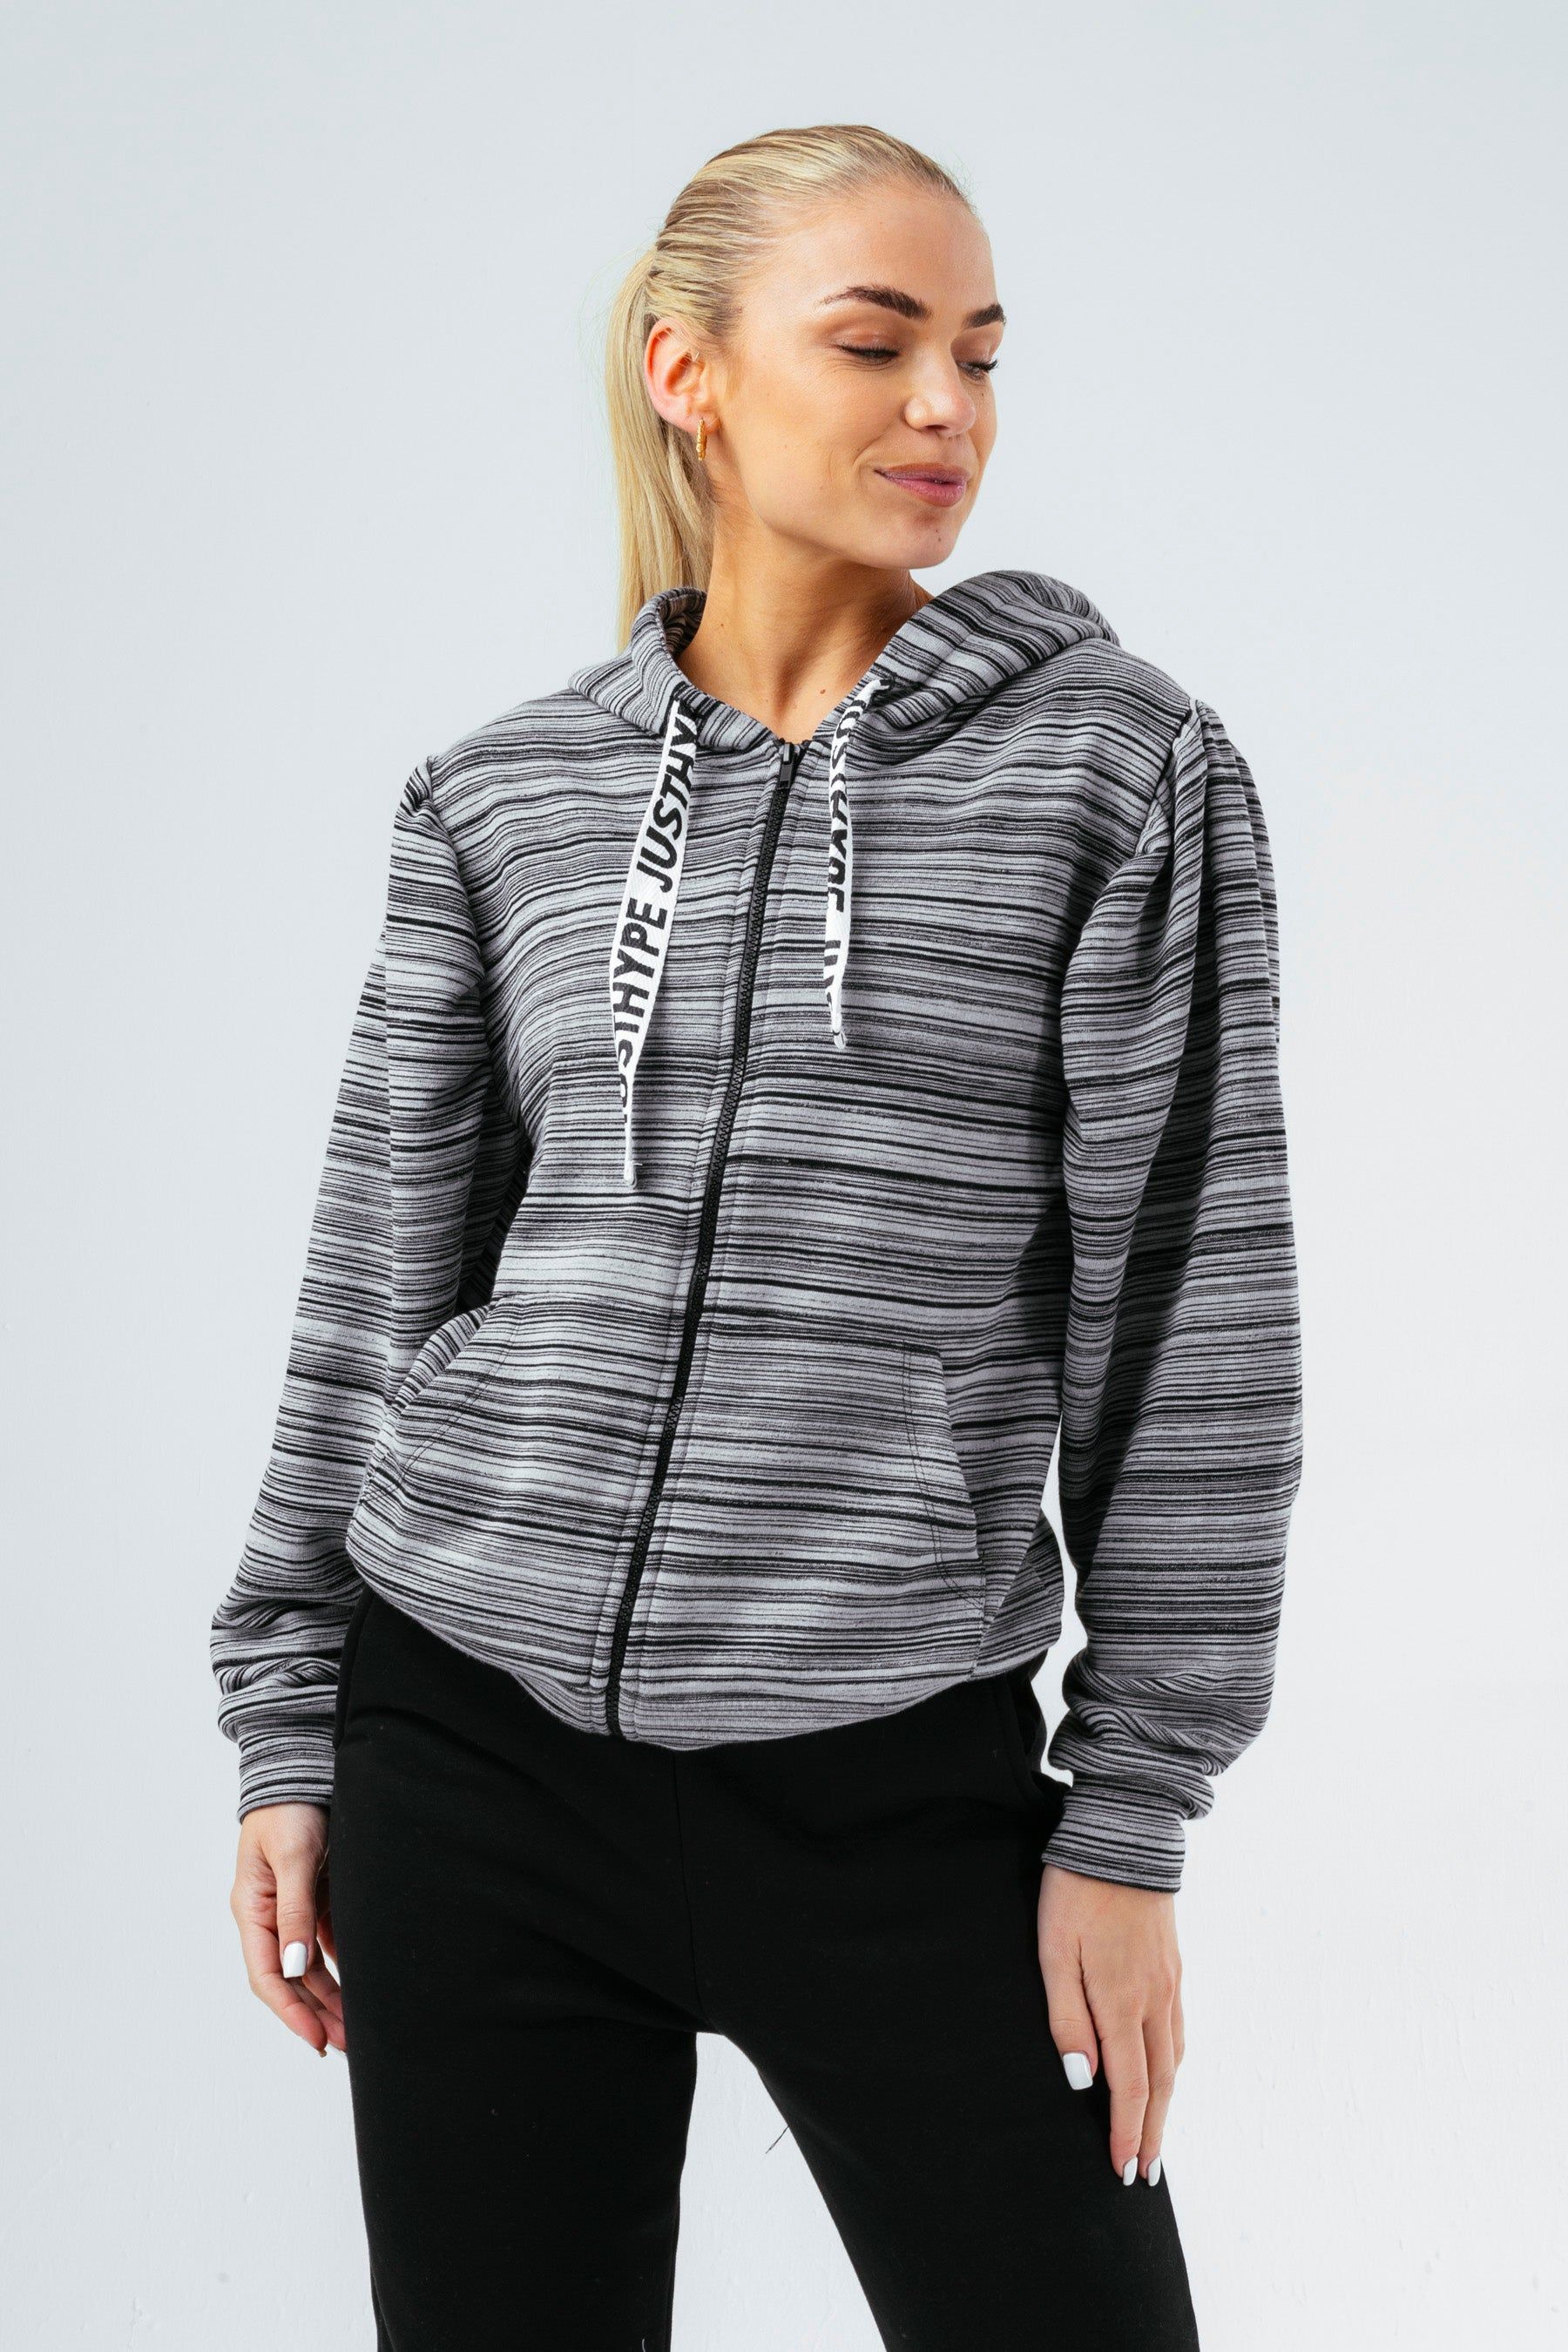 The zip hoodie staple you need every season. The HYPE. Women's Zip Hoodie. With a fixed hood, fitted cuffs, elasticaited waistband, embossed zip pullers and double pockets. Designed in a soft touch fabric base for the ultimate comfort and breathable space. If you like an oversized fit, opt for a size up, if you like a casual fit, stay true to your usual size. The model wears a size 8. Machine Washable